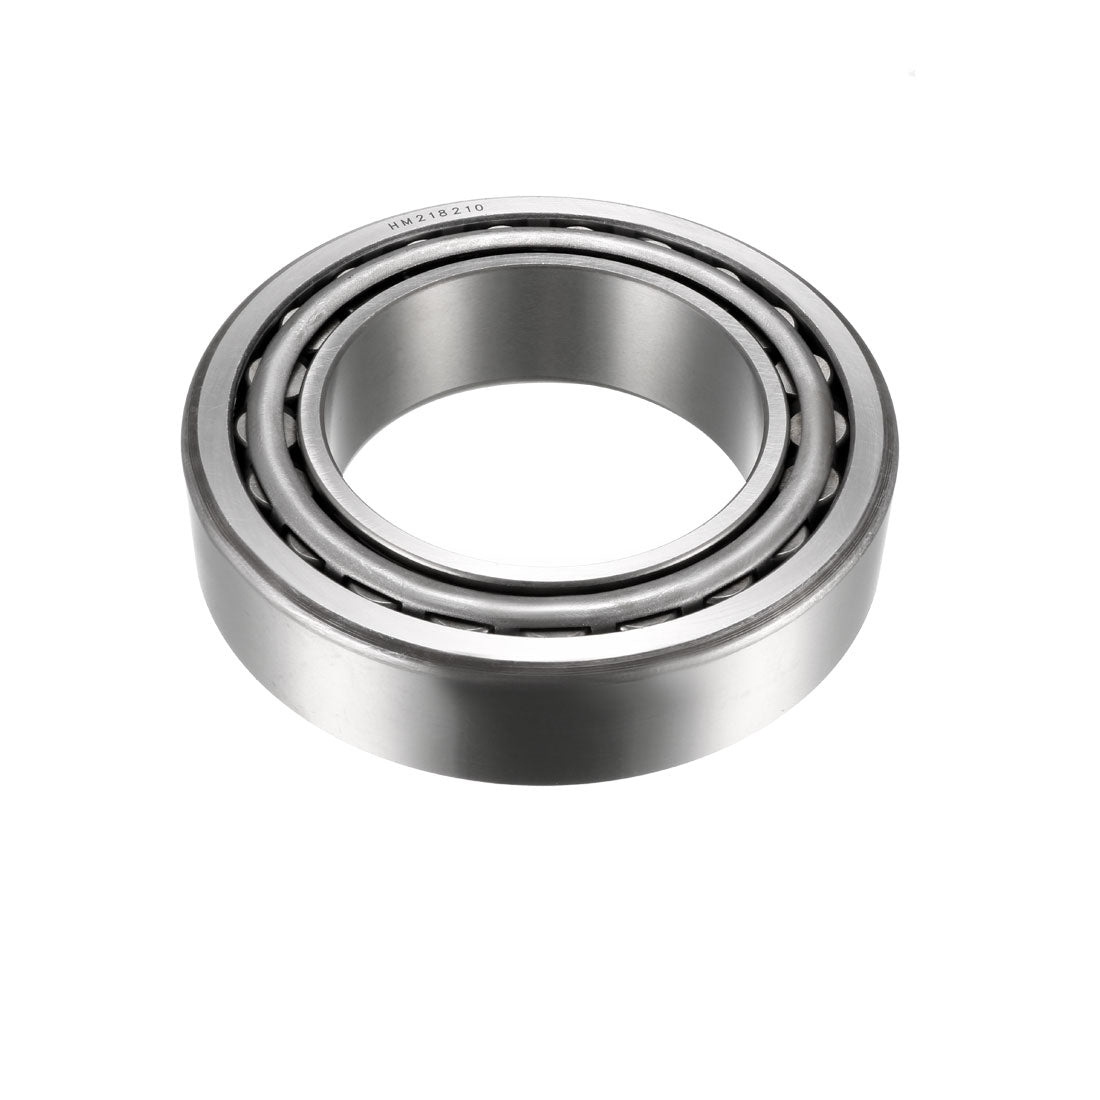 Uxcell Uxcell HM803149/HM803110 Tapered Roller Bearing Cone and Cup Set 1.75" Bore 3.5" O.D.